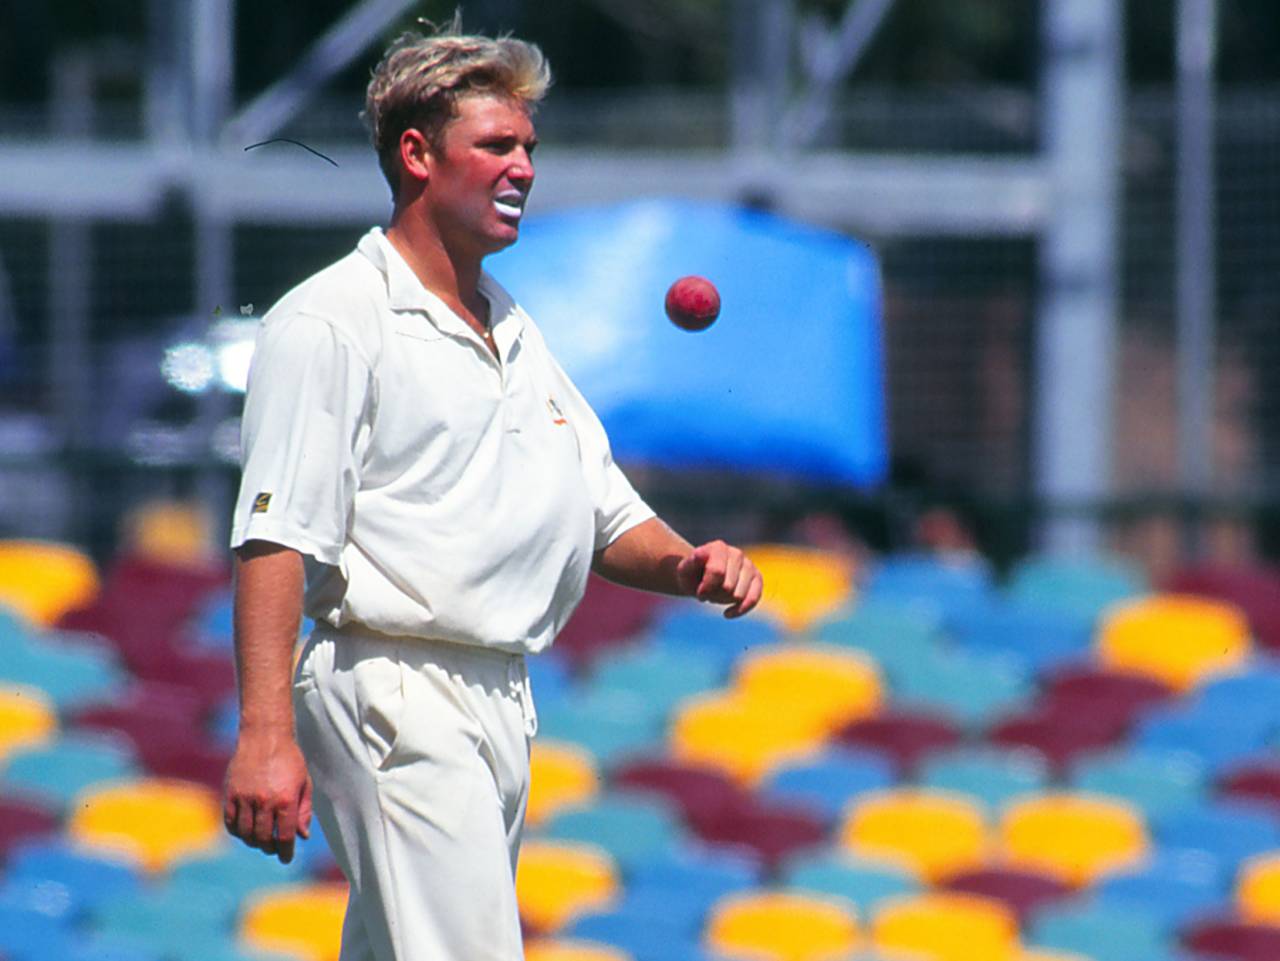 Shane Warne could clear his mind of an unsuccessful previous ball to attack afresh with the next&nbsp;&nbsp;&bull;&nbsp;&nbsp;Getty Images